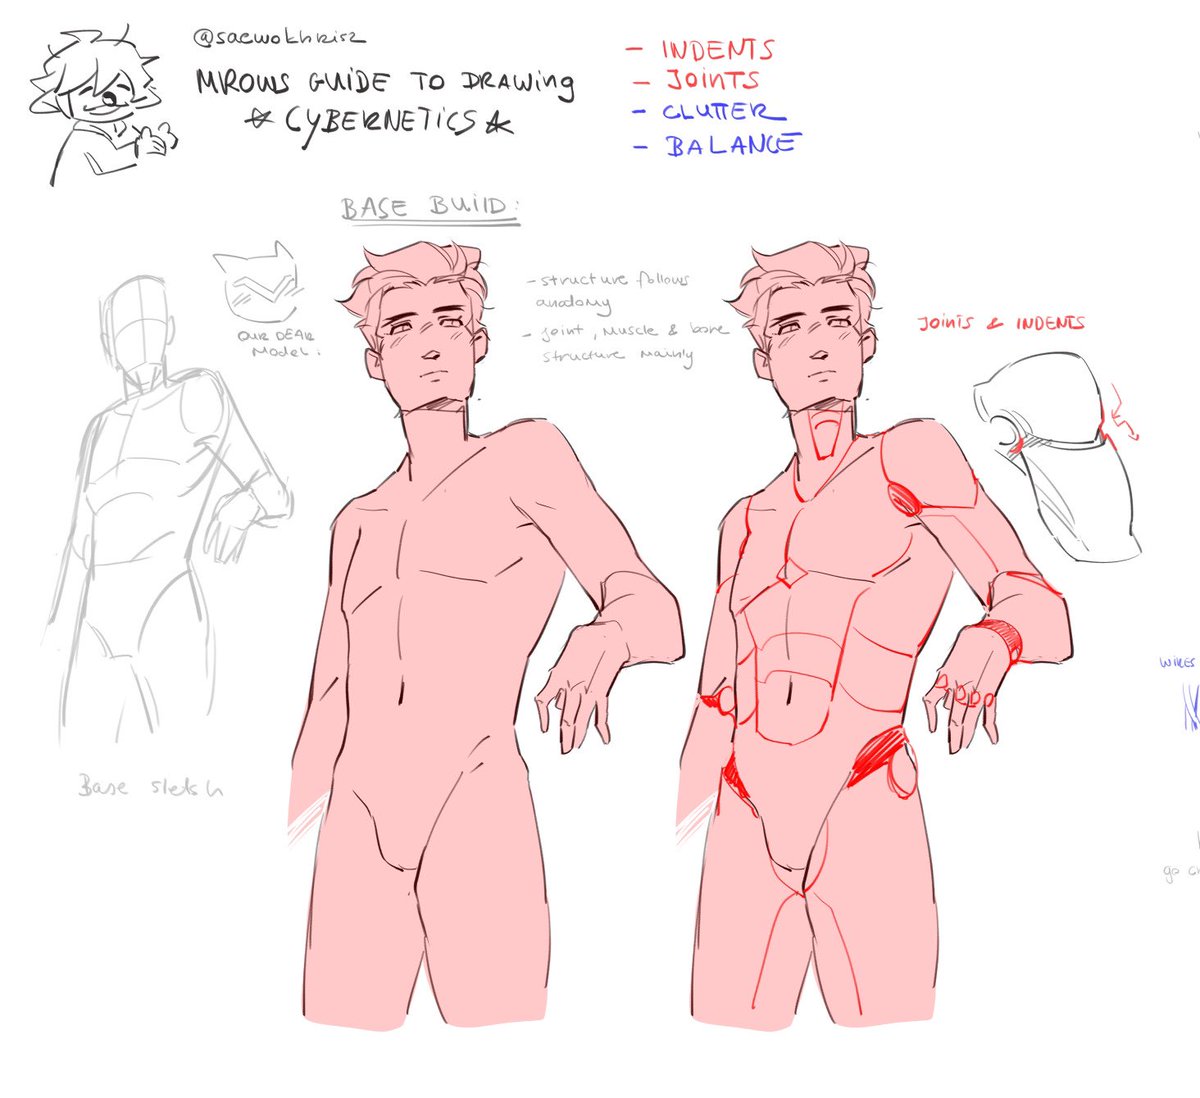 i made this art guide to how i draw cybernetics cuz someome on tumblr asked me, if anyome wants it :U 